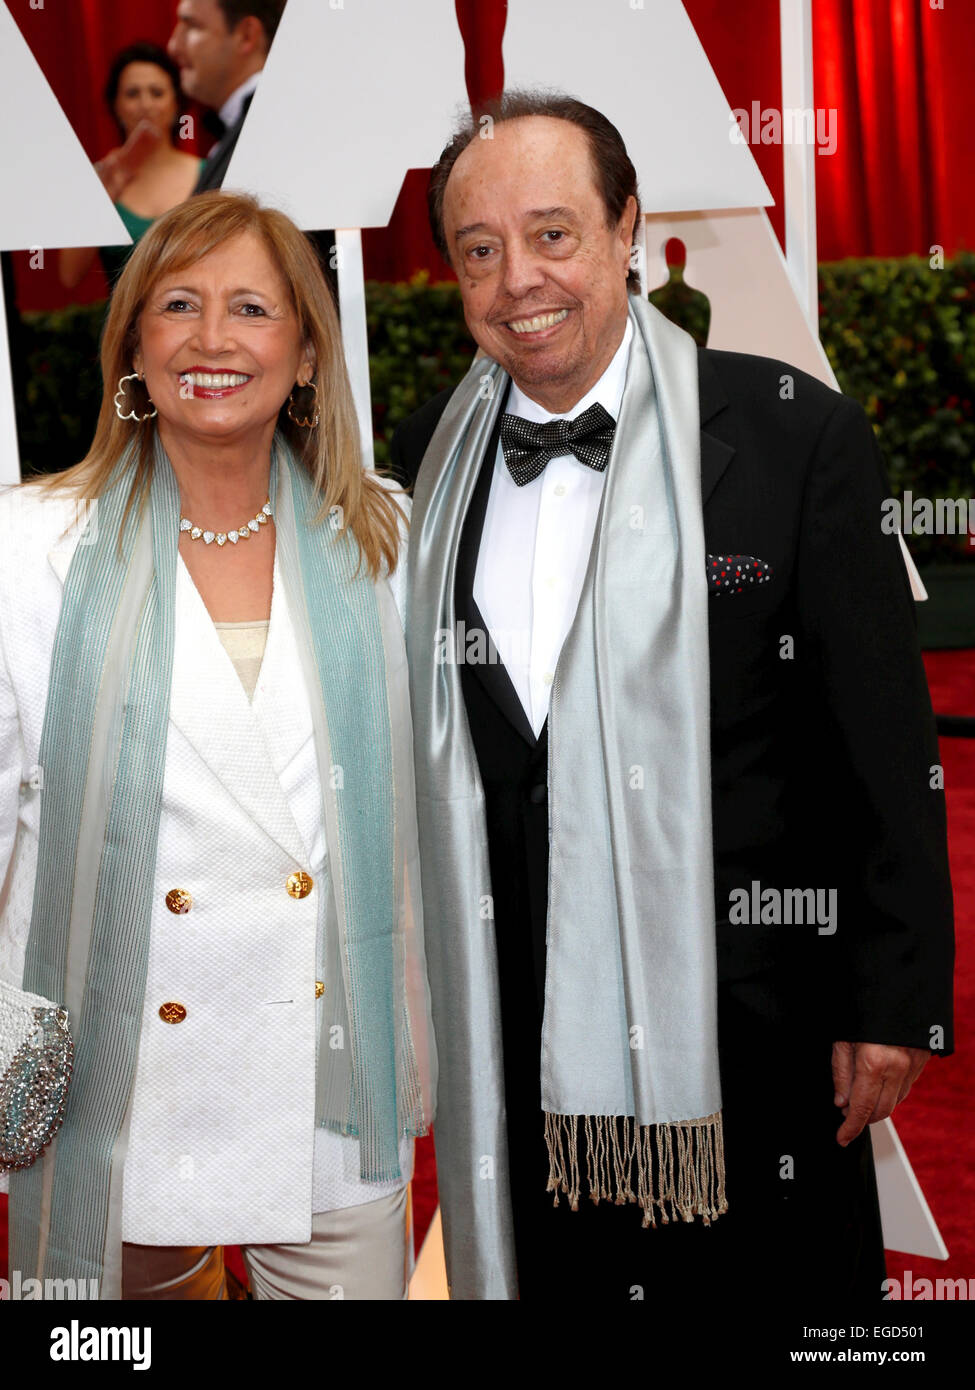 Singer Gracinha Leporace and husband Sergio Mendes attend the 87th Academy Awards, Oscars, at Dolby Theatre in Los Angeles, USA, on 22 February 2015. Photo: Hubert Boesl/dpa - NO WIRE SERVICE - © dpa picture alliance/Alamy Live News Credit:  dpa picture alliance/Alamy Live News Stock Photo